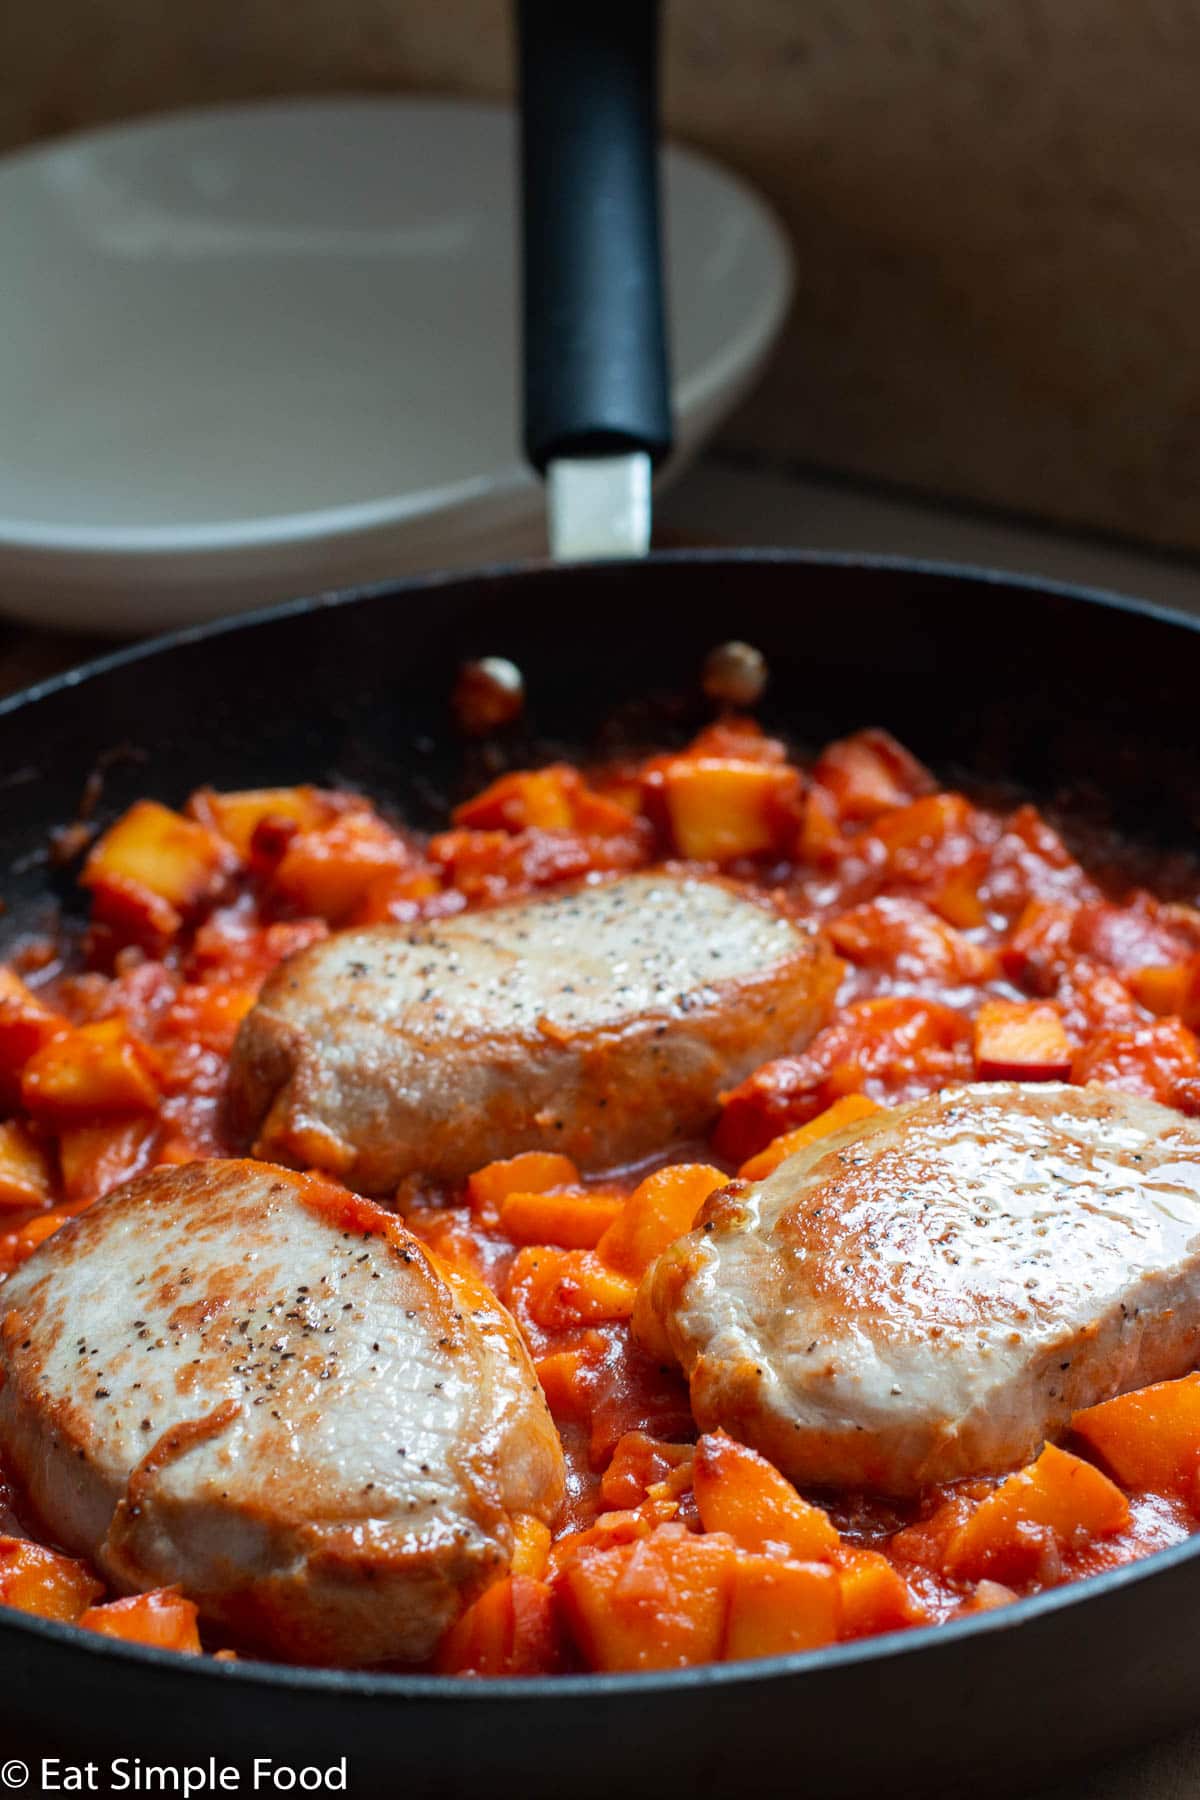 Side view of 3 boneless pork chops in a peach tomato sauce in a black skillet.